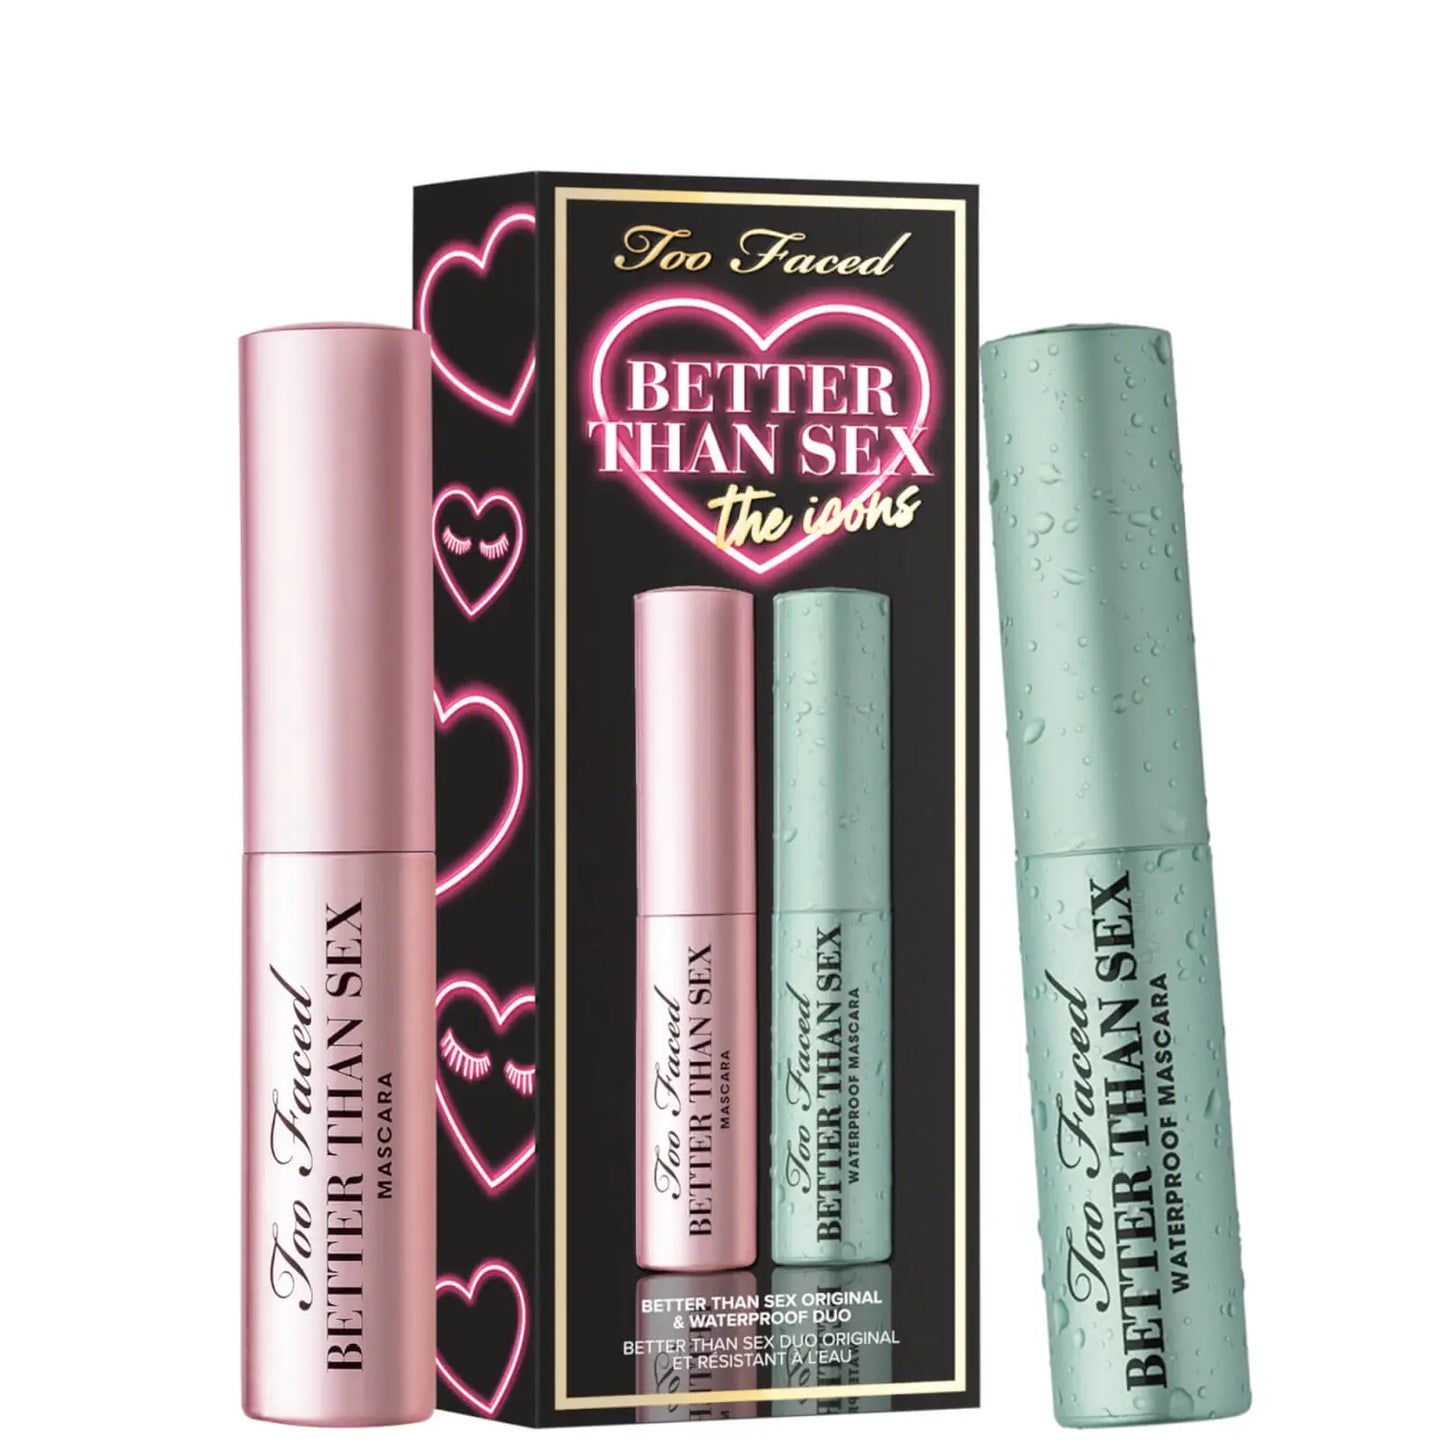 Too Faced - Better Than Sex The Icons Kit